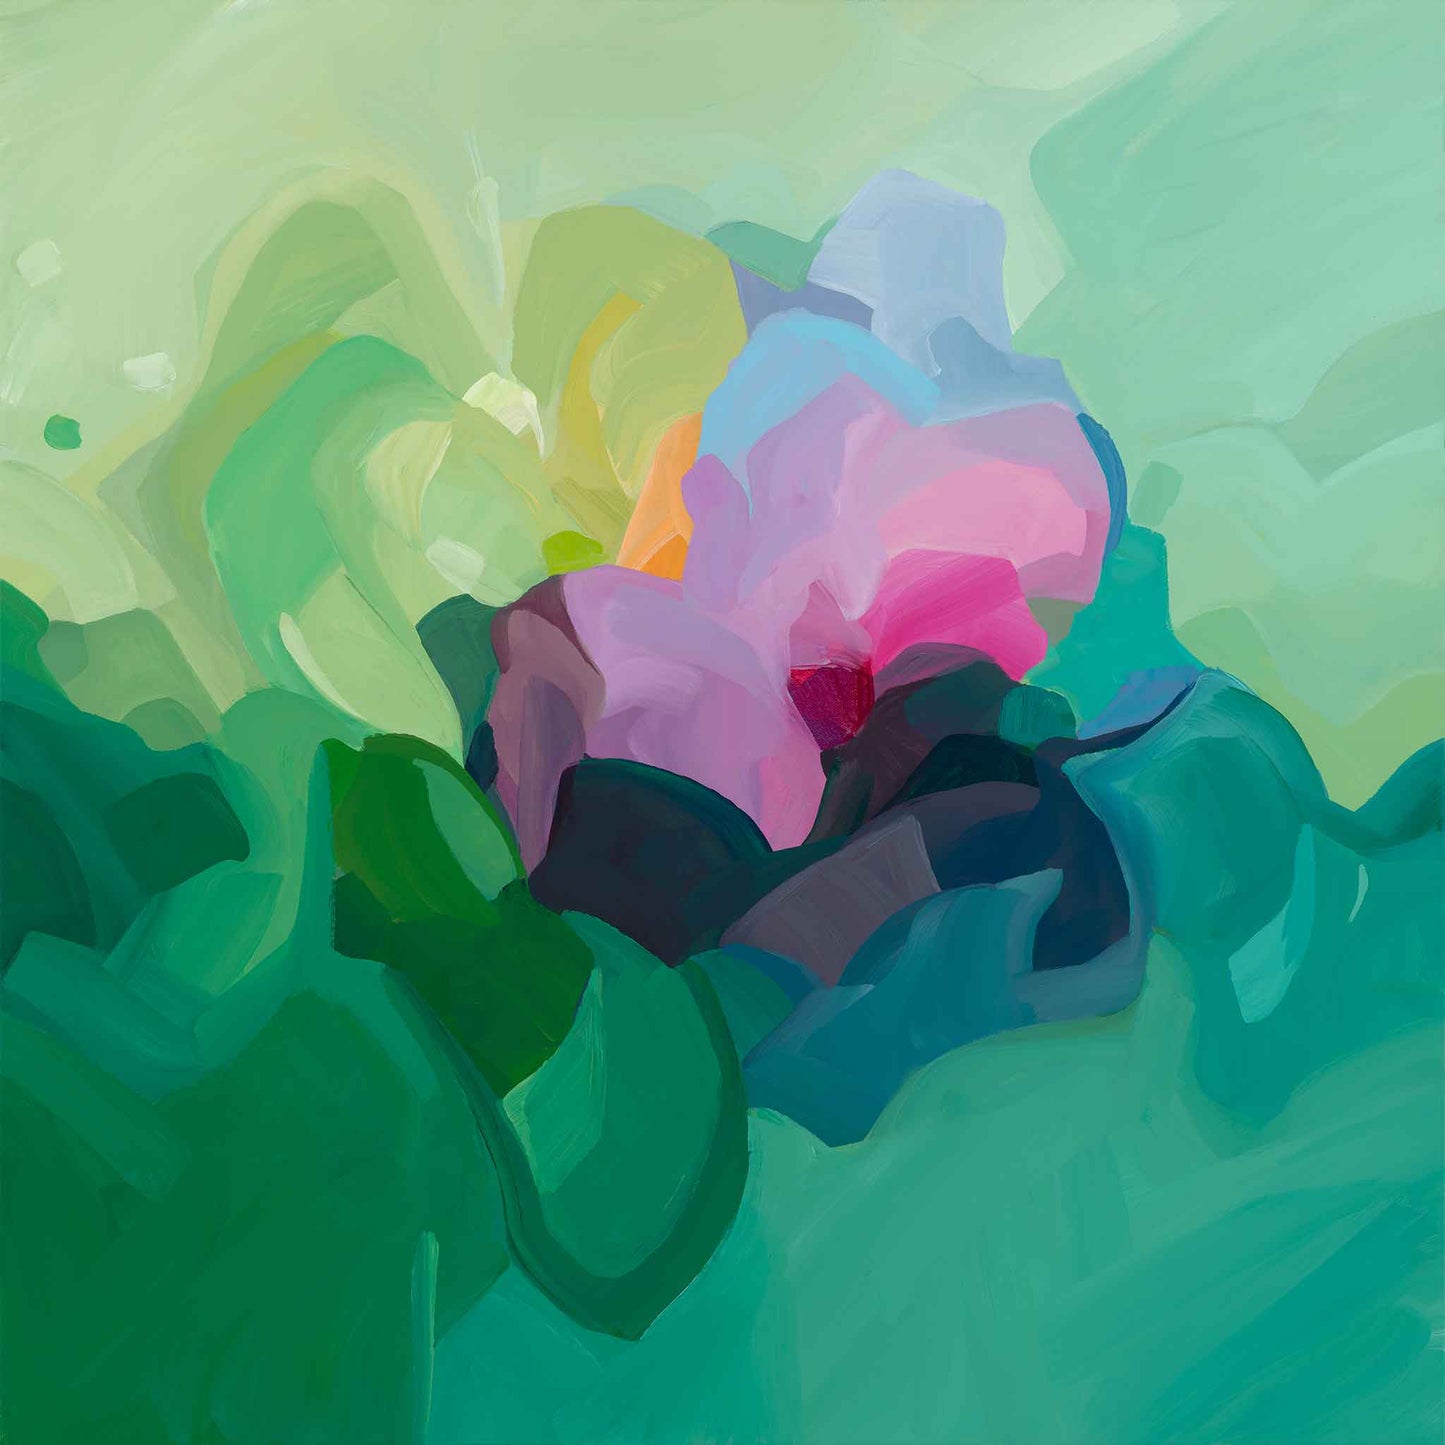 jade green acrylic abstract painting on canvas by Susannah Bleasby Canadian abstract artist